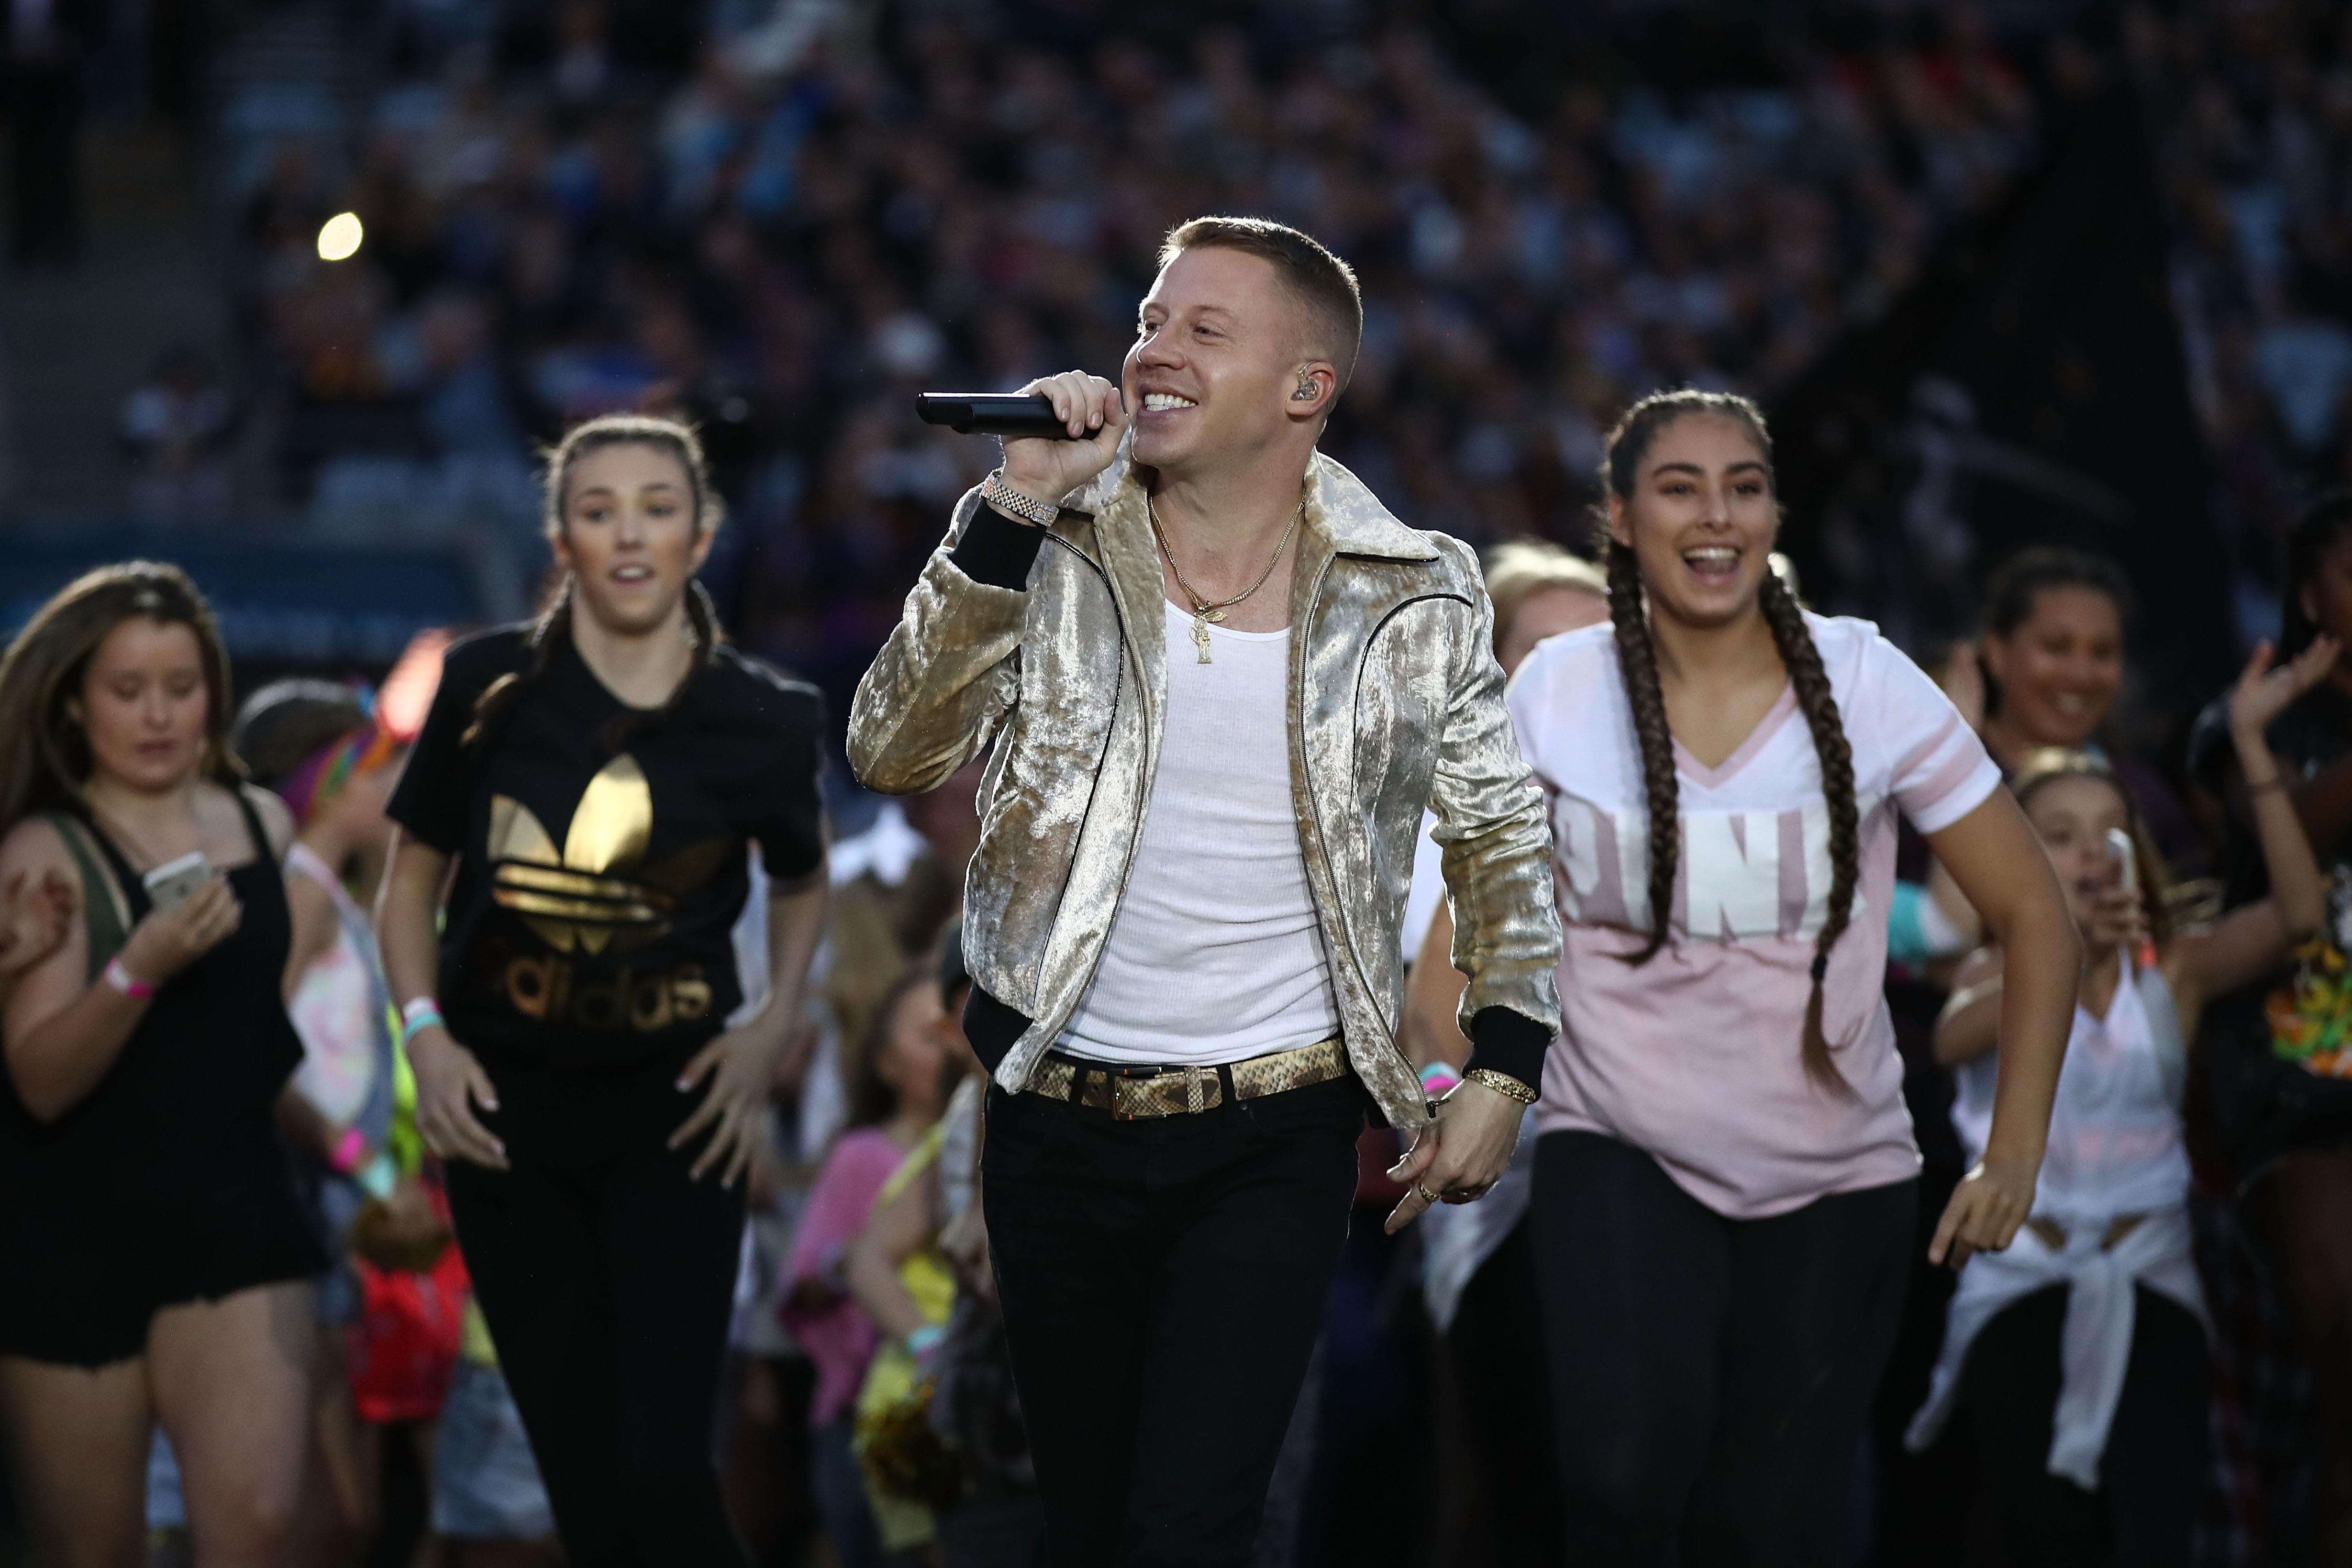 Macklemore Hires Extra Security After Receiving Death Threats